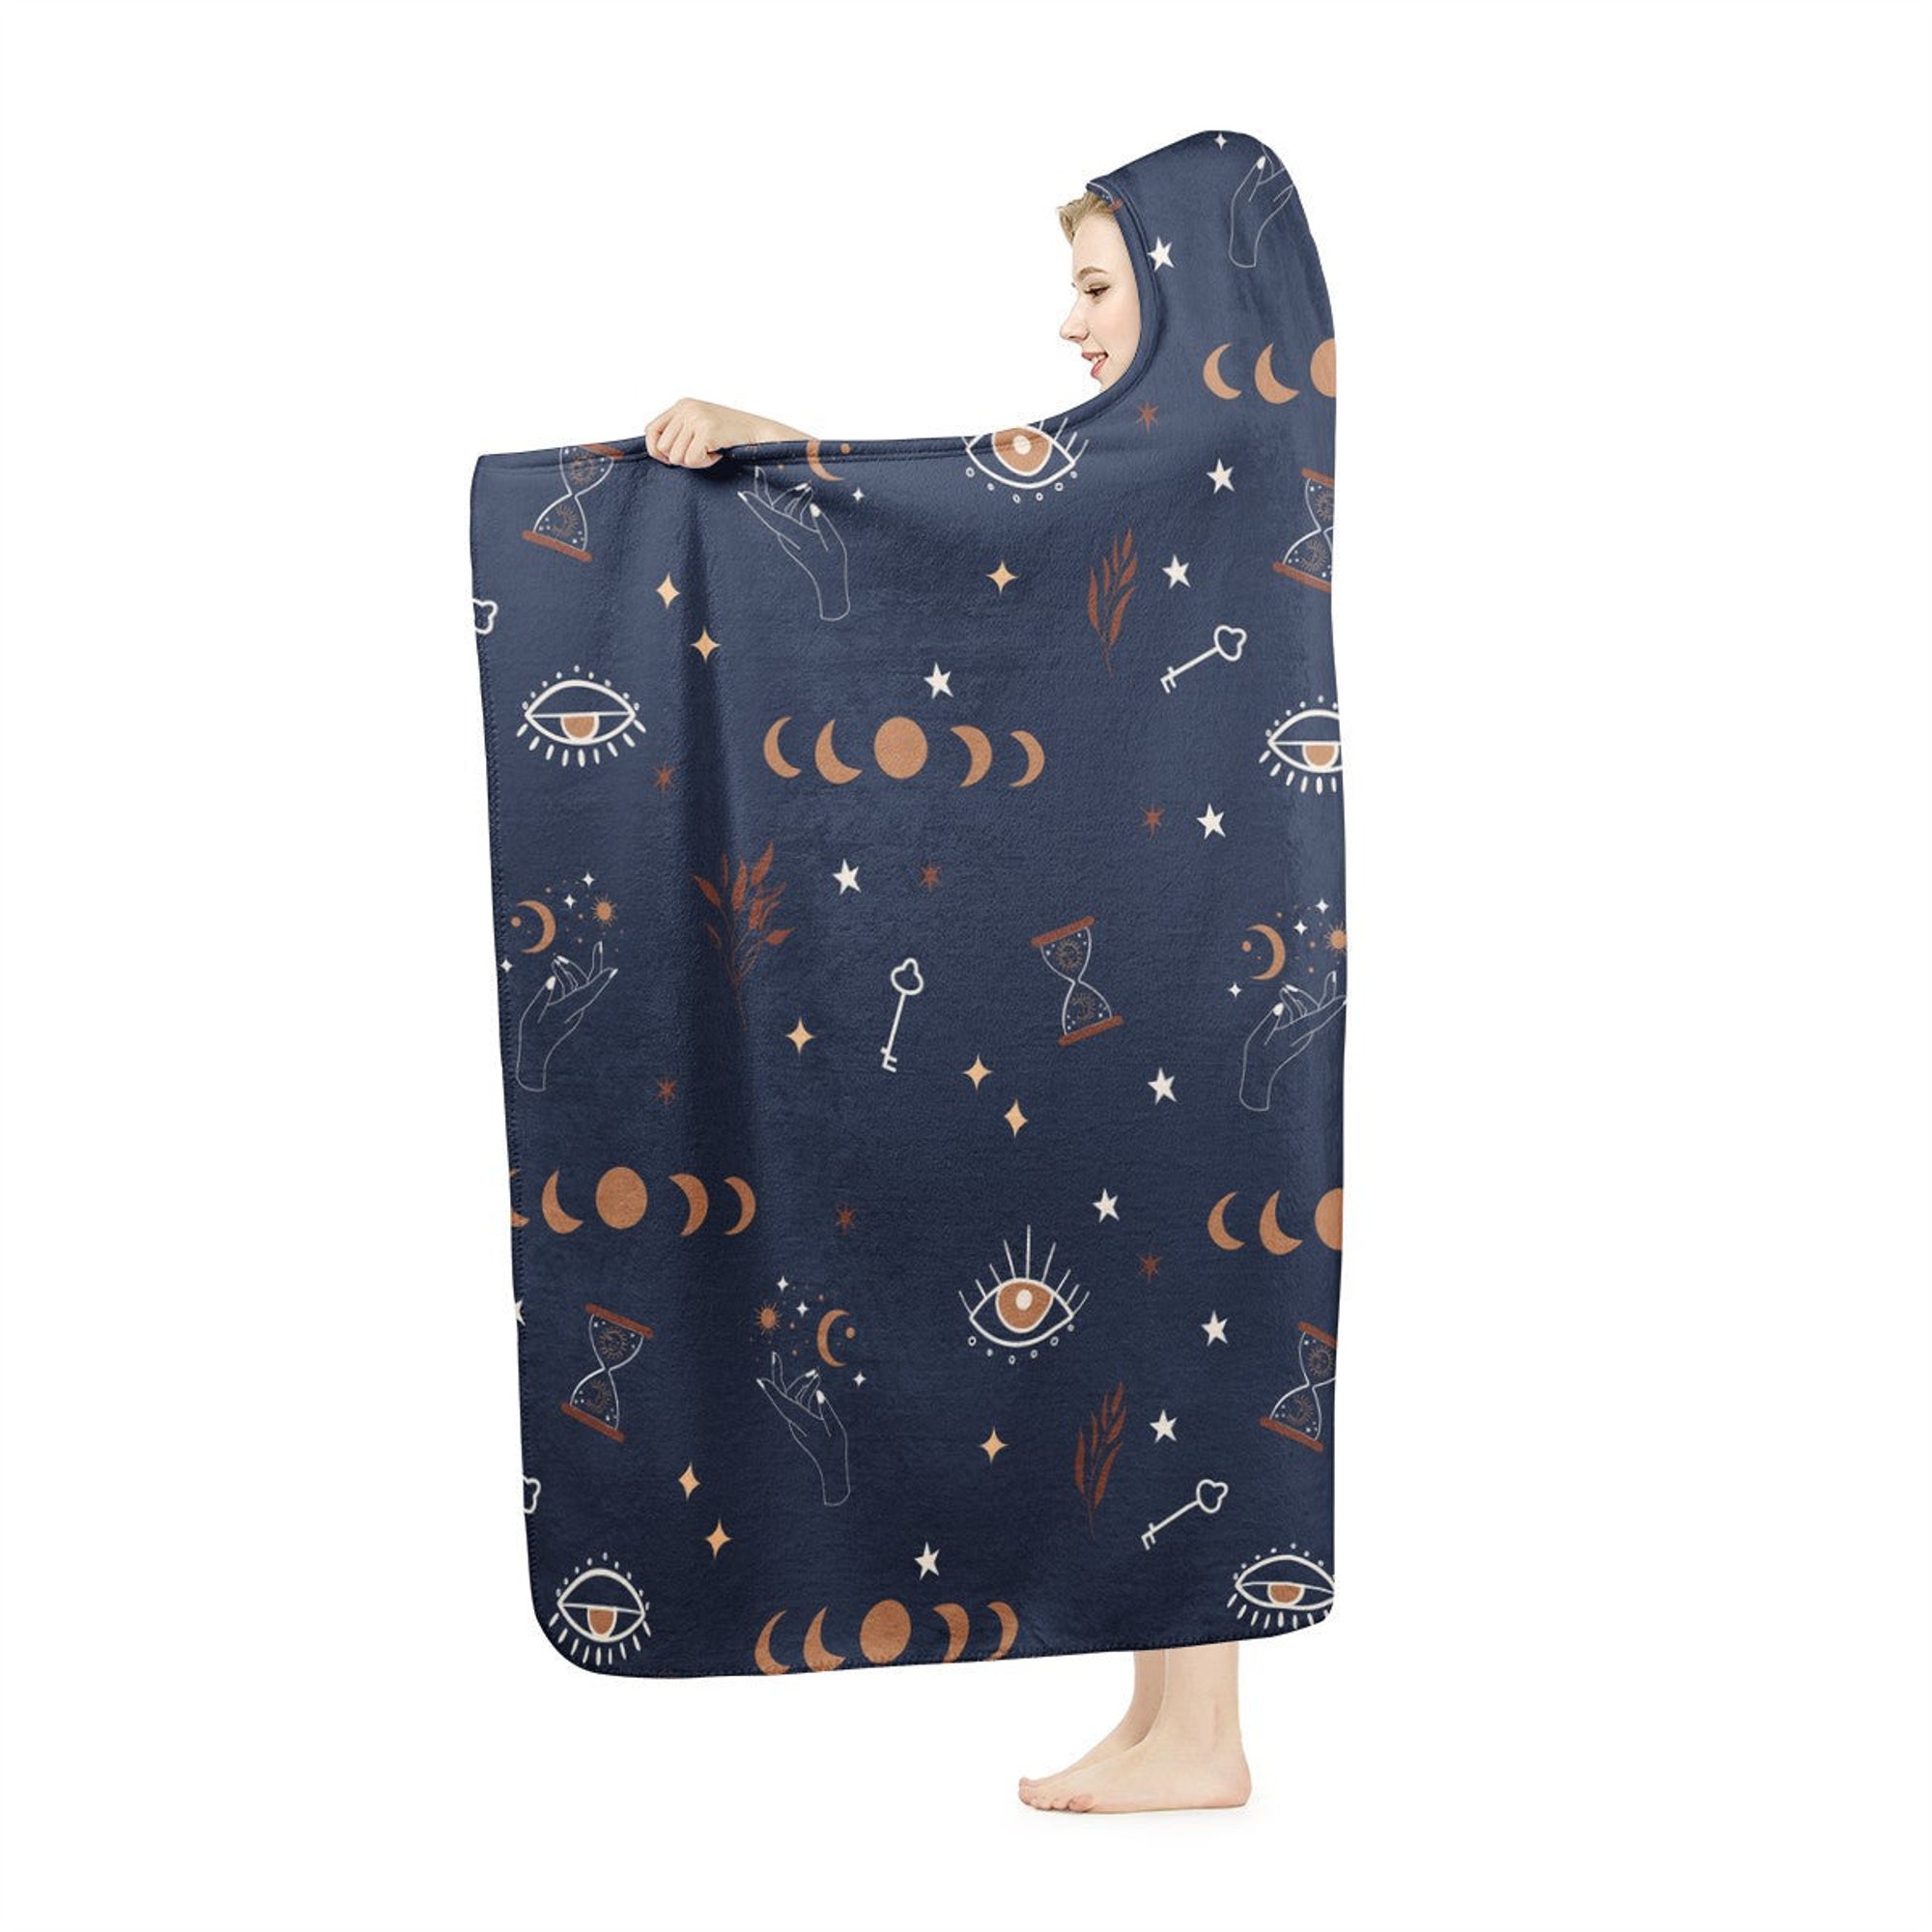 Esoteric Moon Phases Alchemy Stars Hooded Blanket - Crescent Moon, Artistic Trendy Chic Fashion, Tarot Blanket, Warm Wearable Hoodie